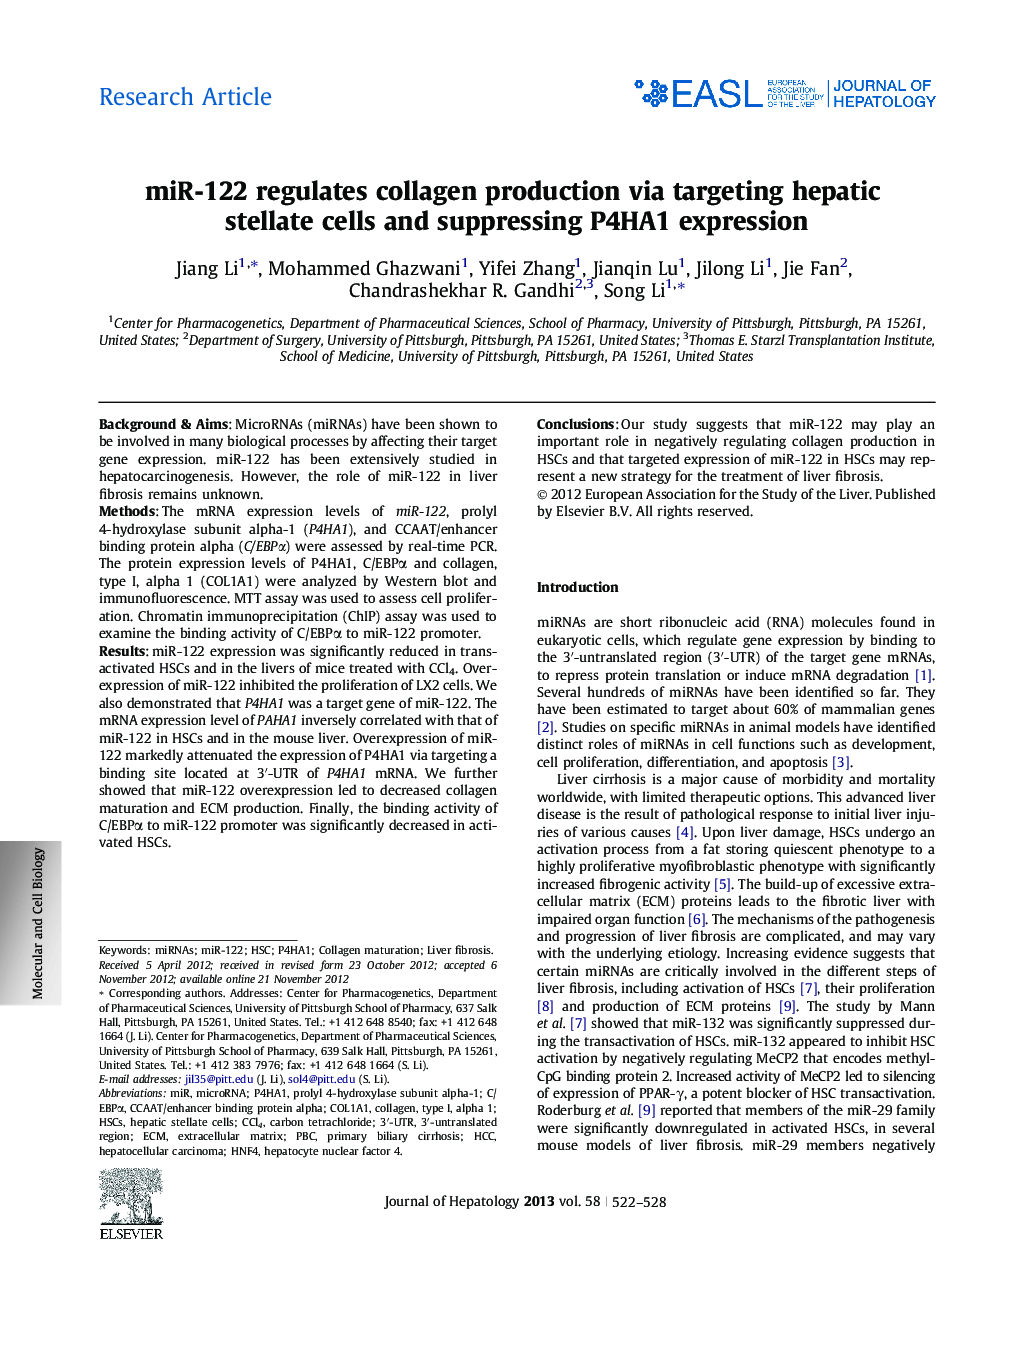 Research ArticlemiR-122 regulates collagen production via targeting hepatic stellate cells and suppressing P4HA1 expression